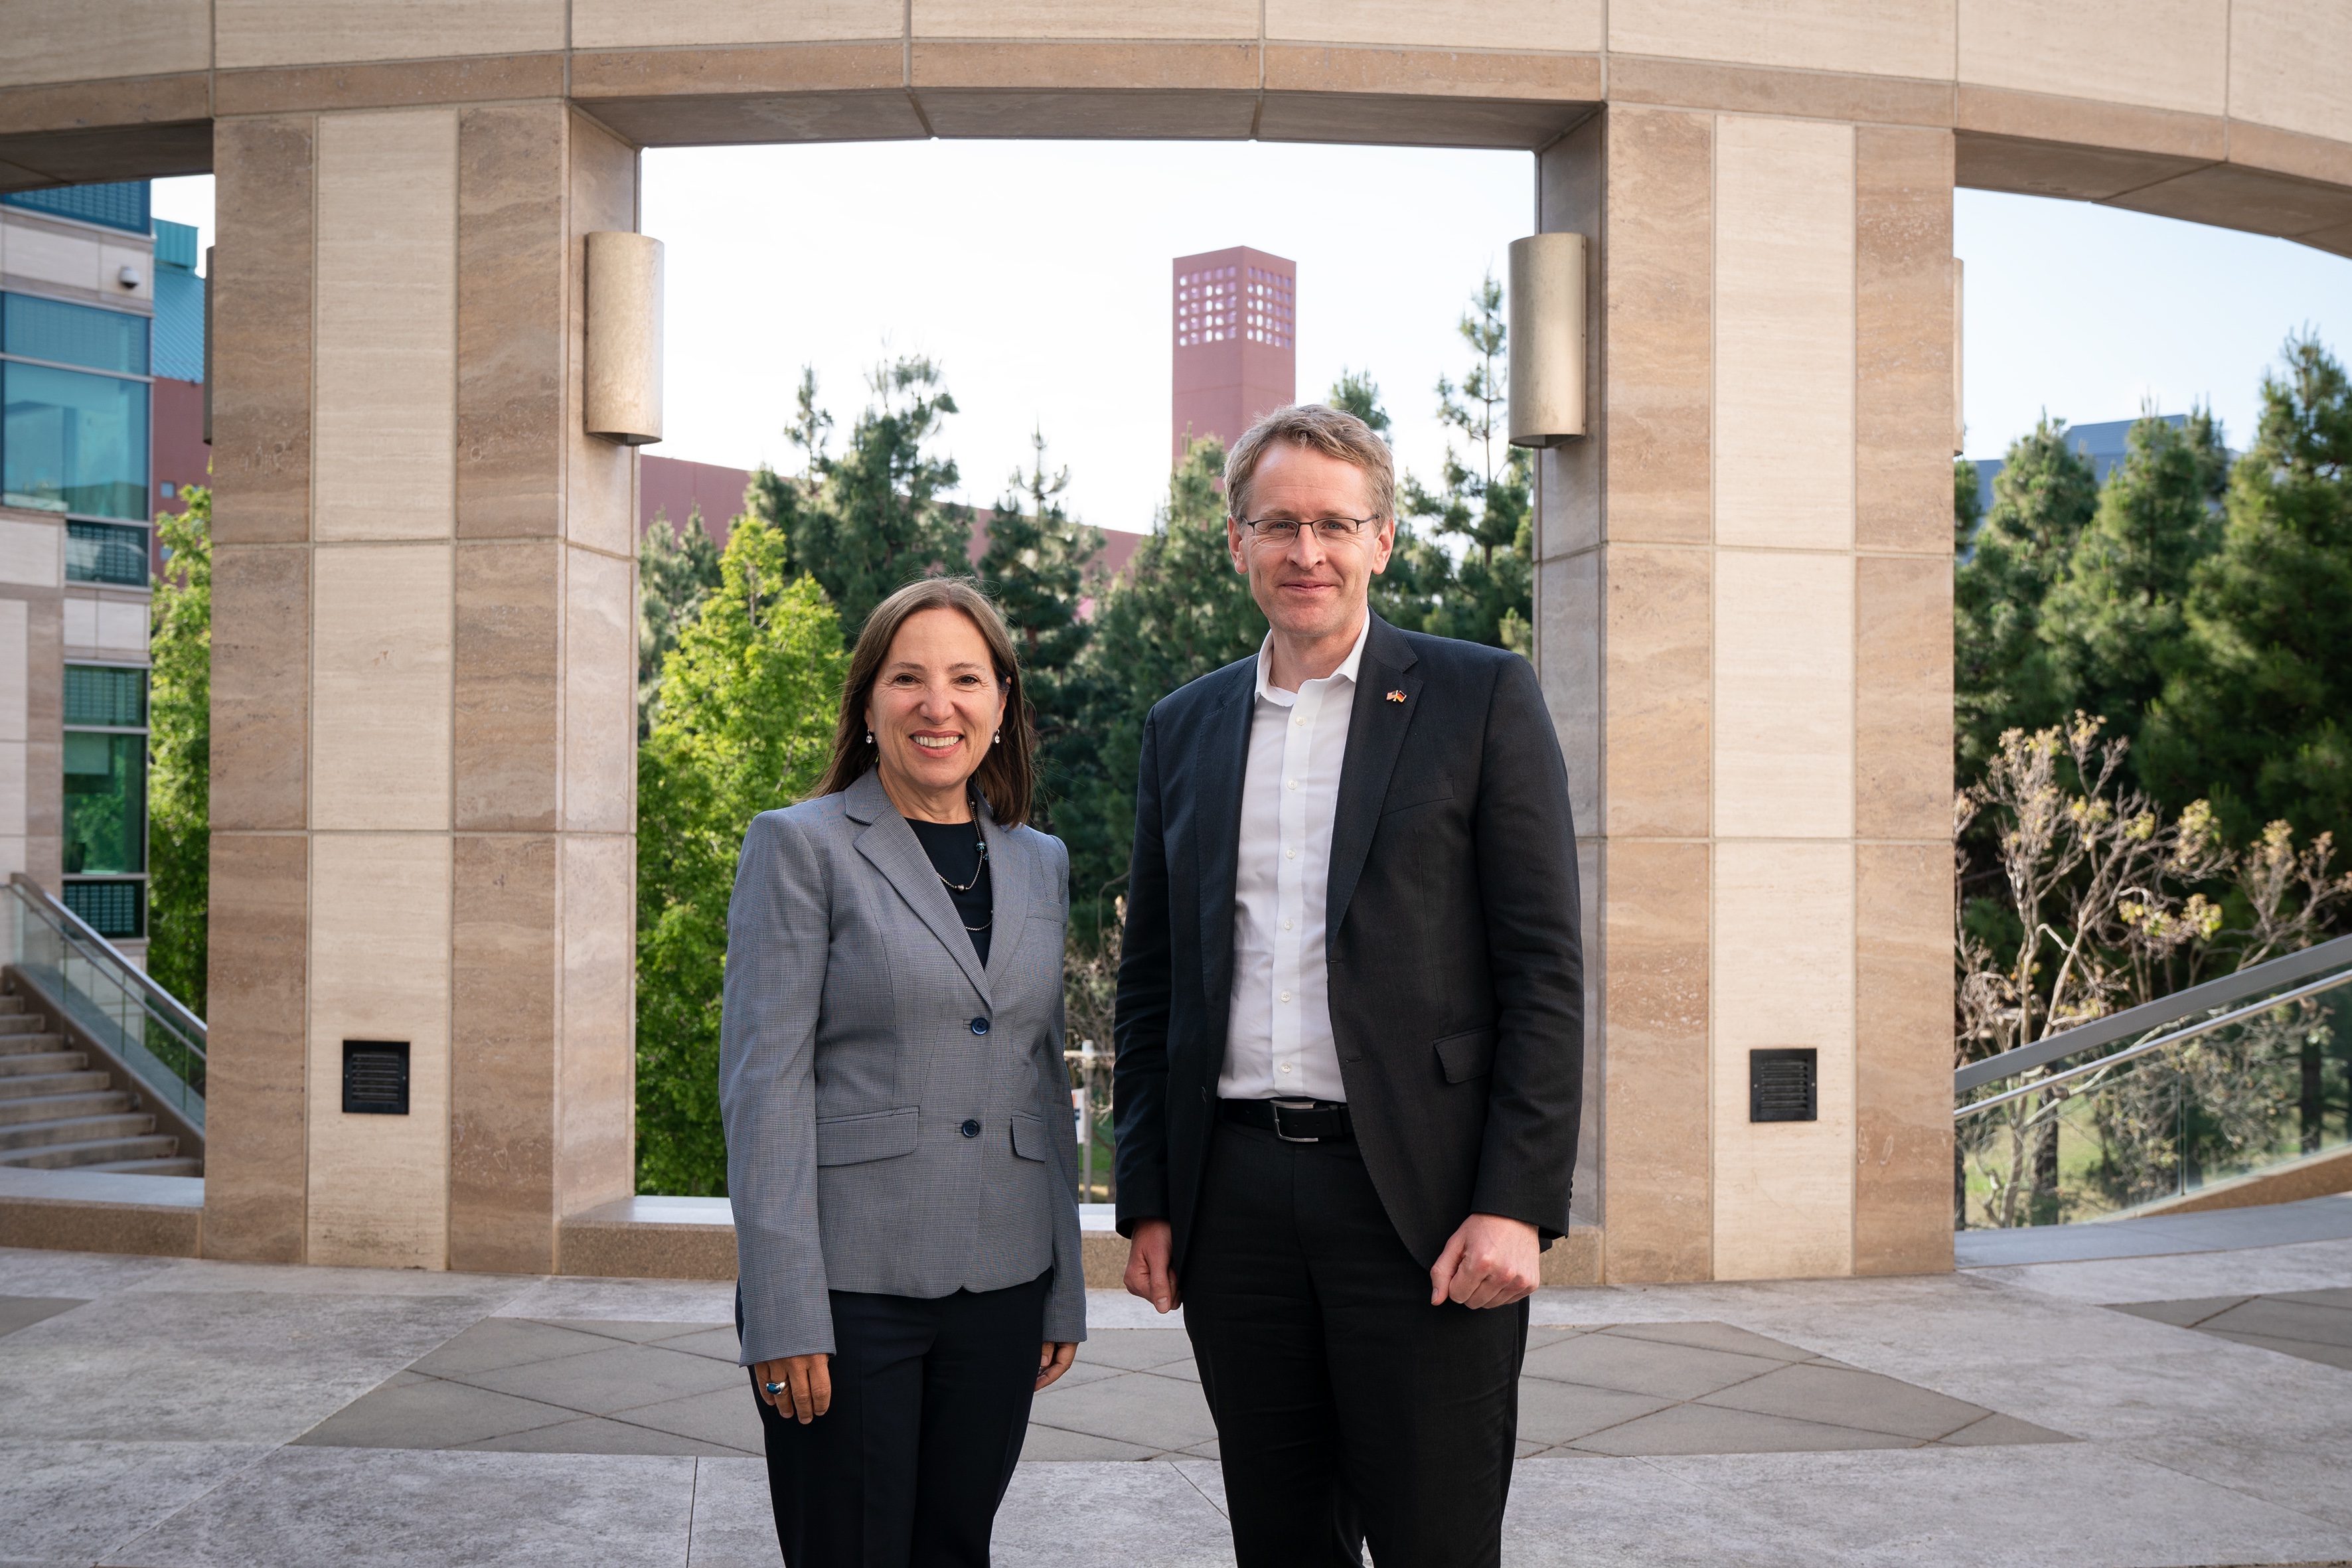 Image of Lt. Governor Kounalakis with he Honorable Daniel Gunther, President-Minister of the German province of Schleswig-Holstein